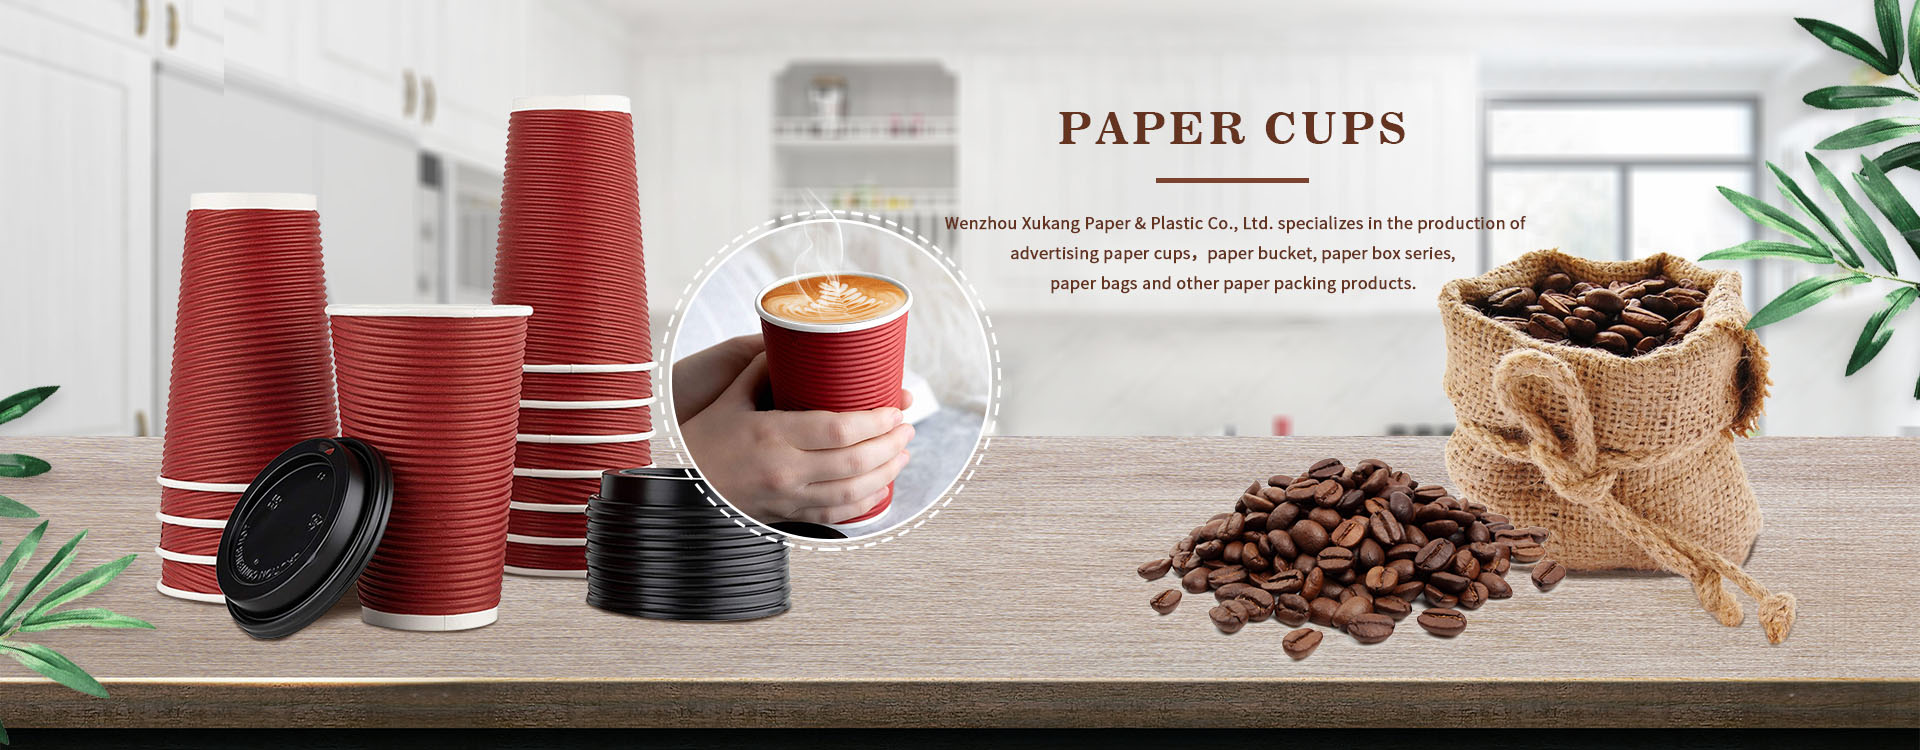 China Paper Cups